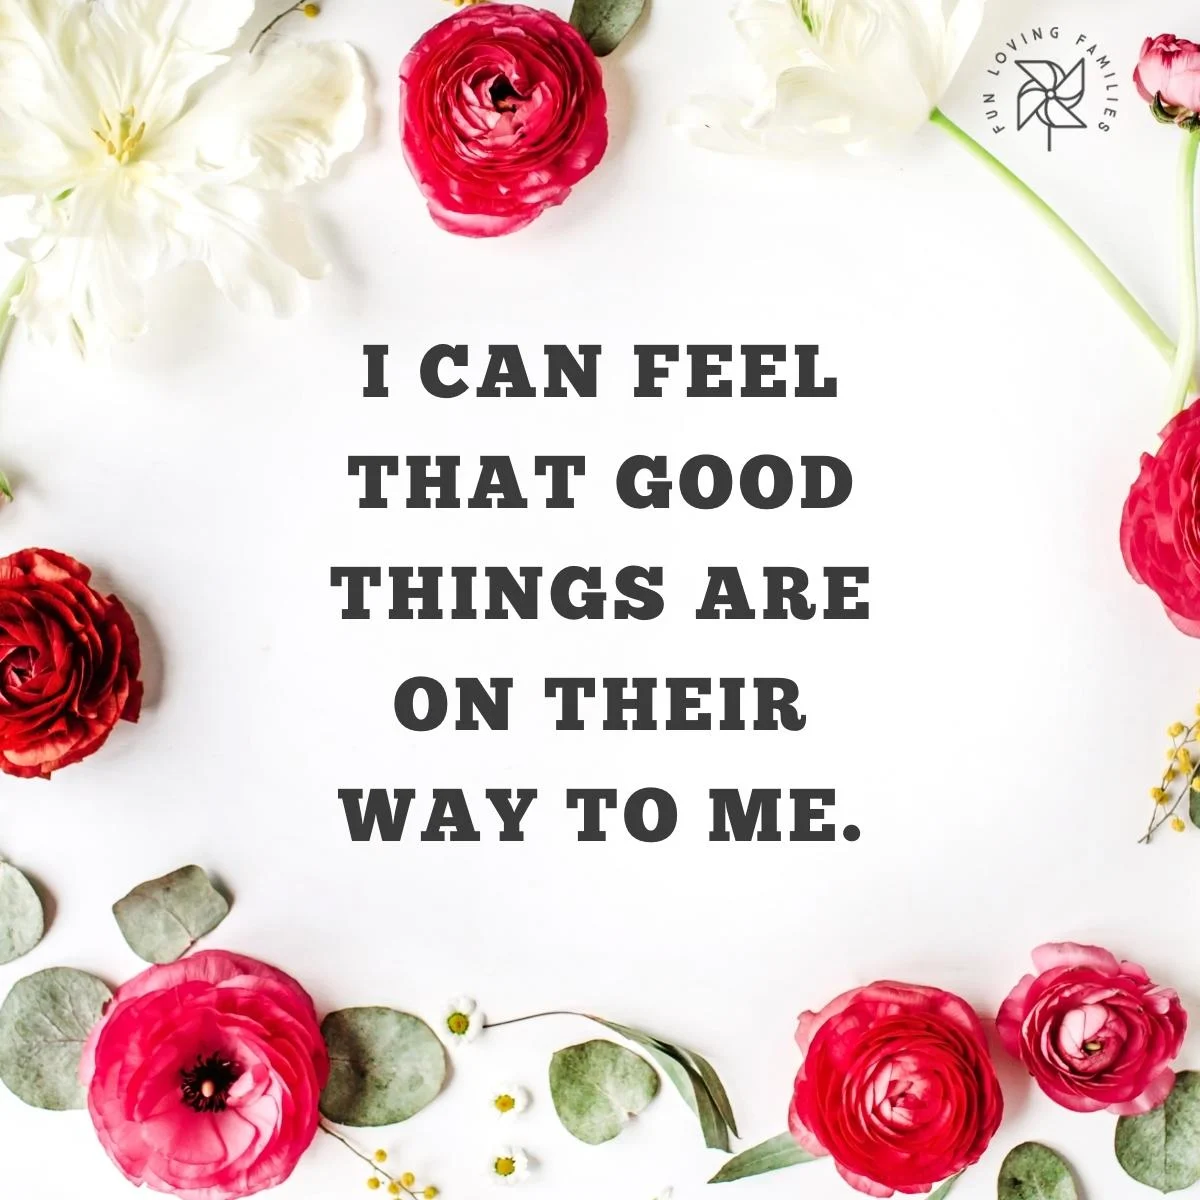 I can feel that good things are on their way to me affirmation image